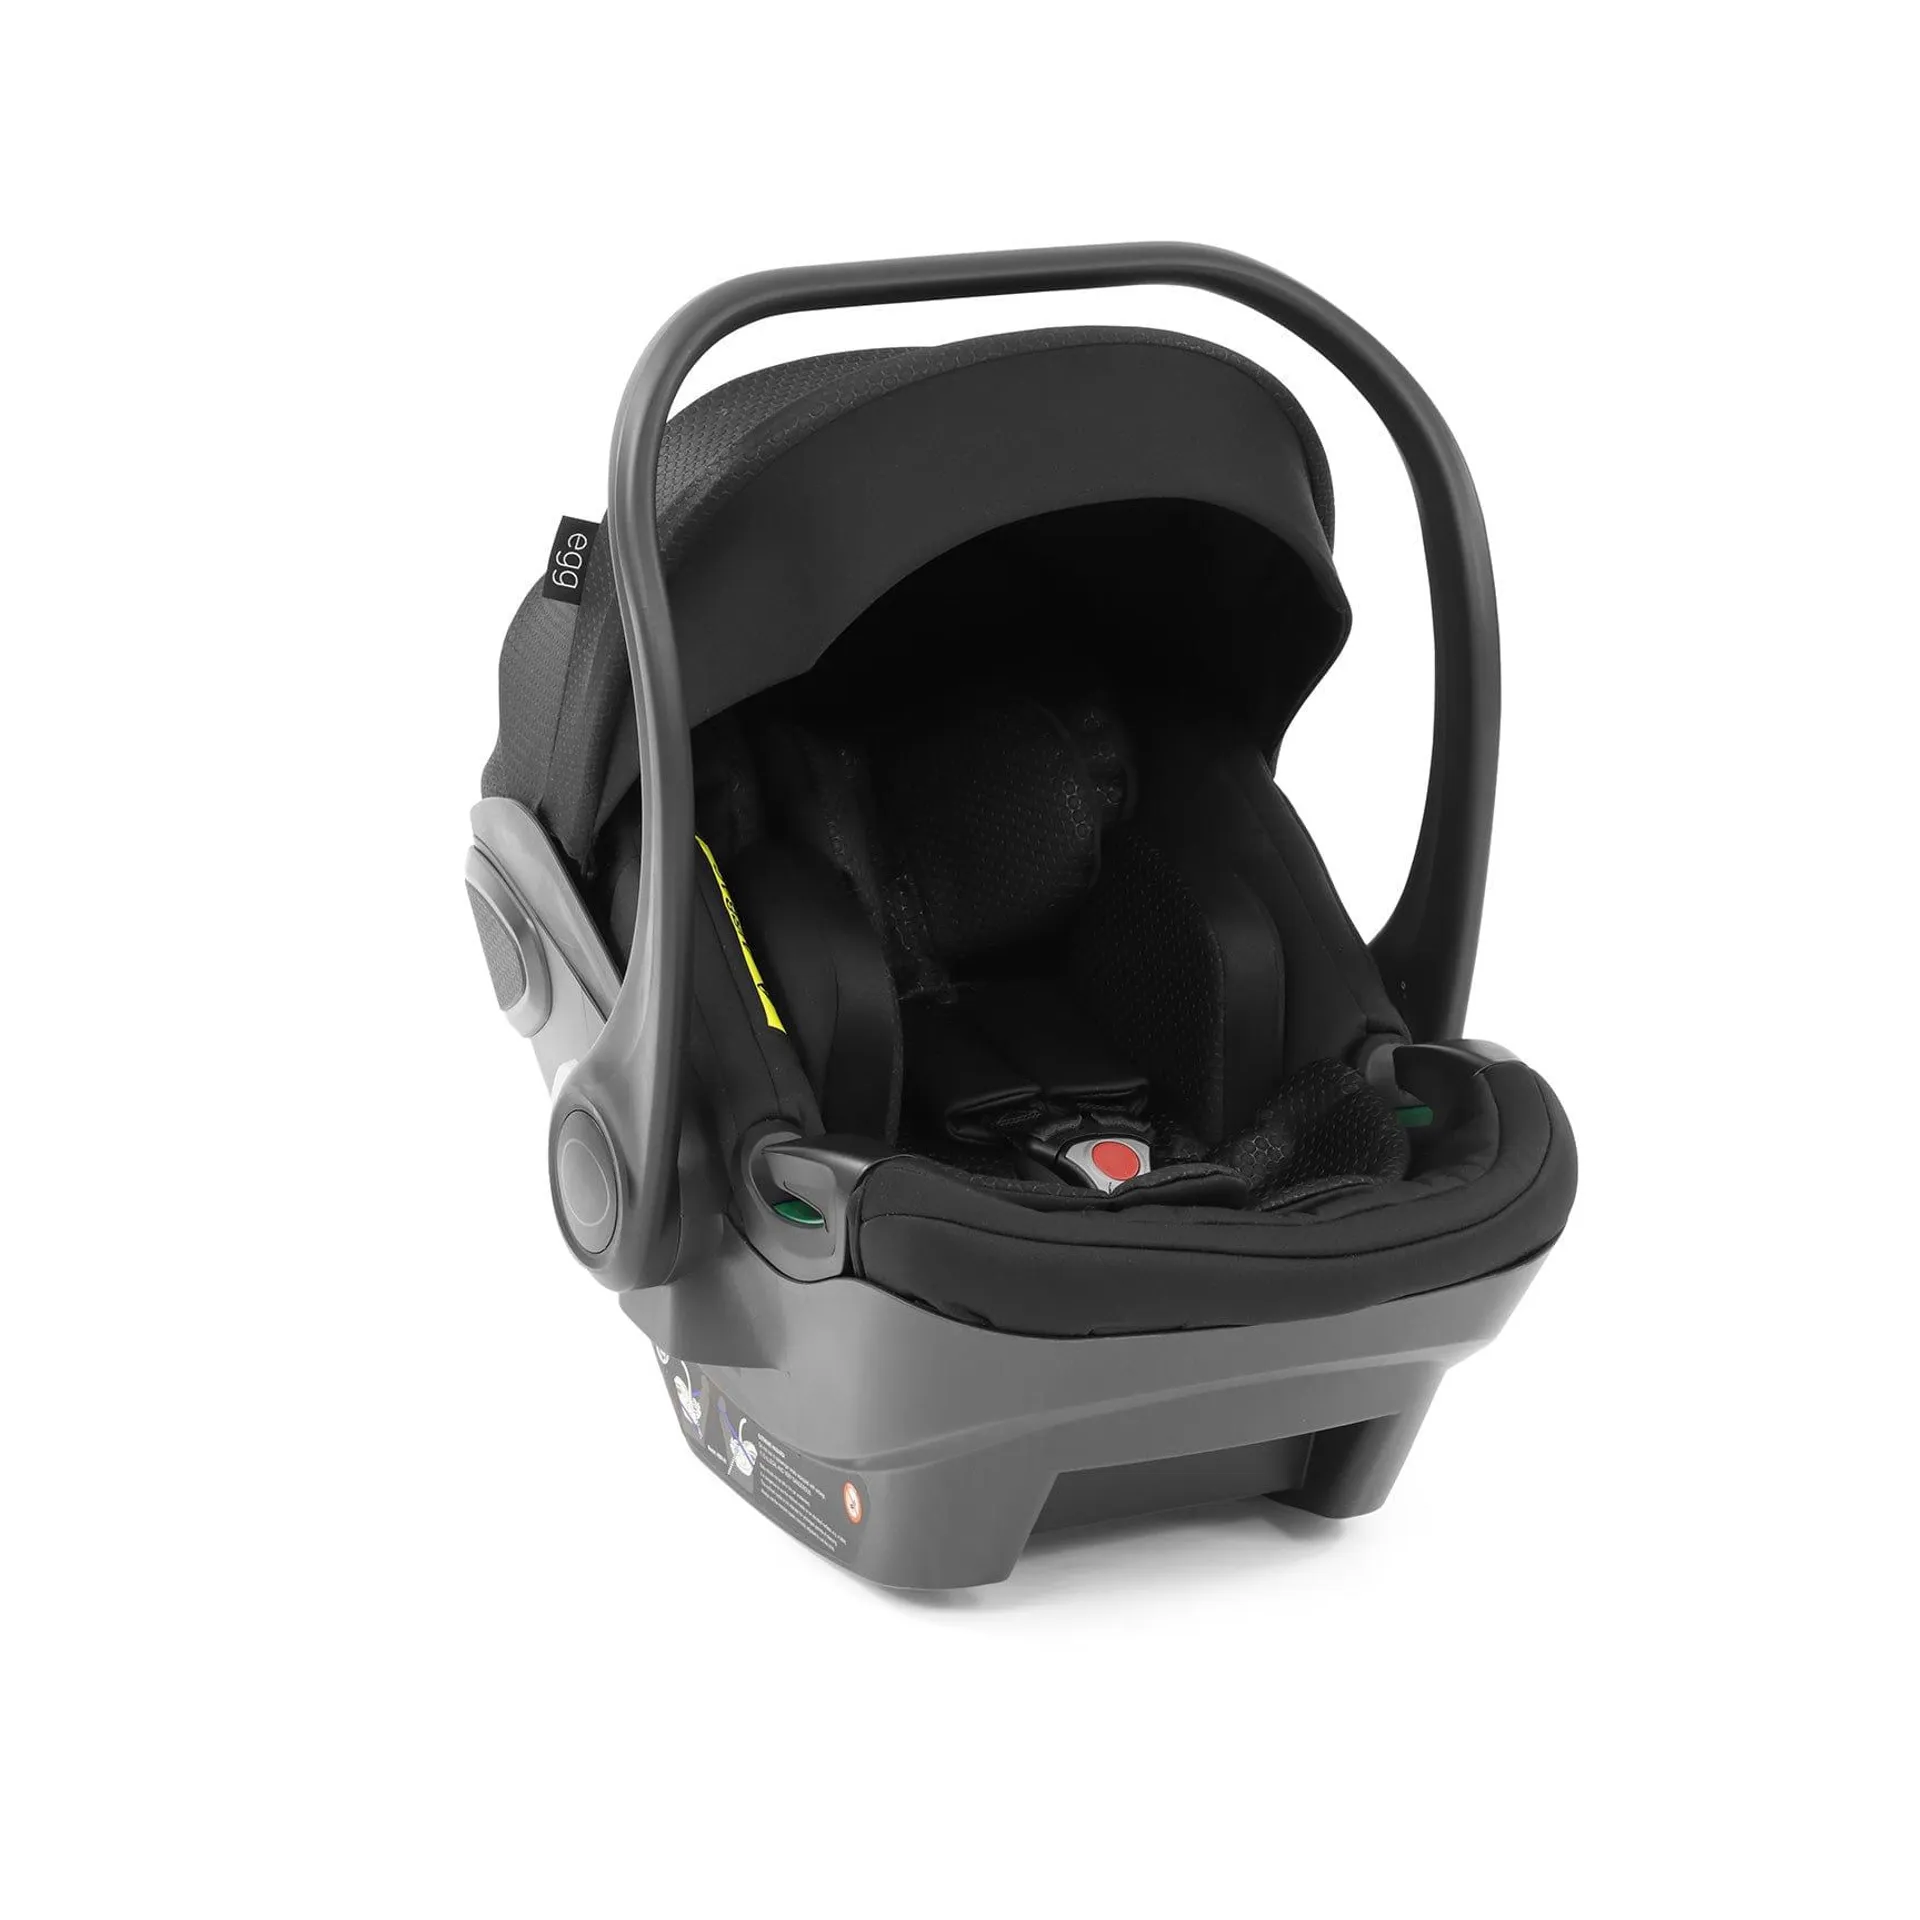 egg Shell i-Size Car Seat Eclipse